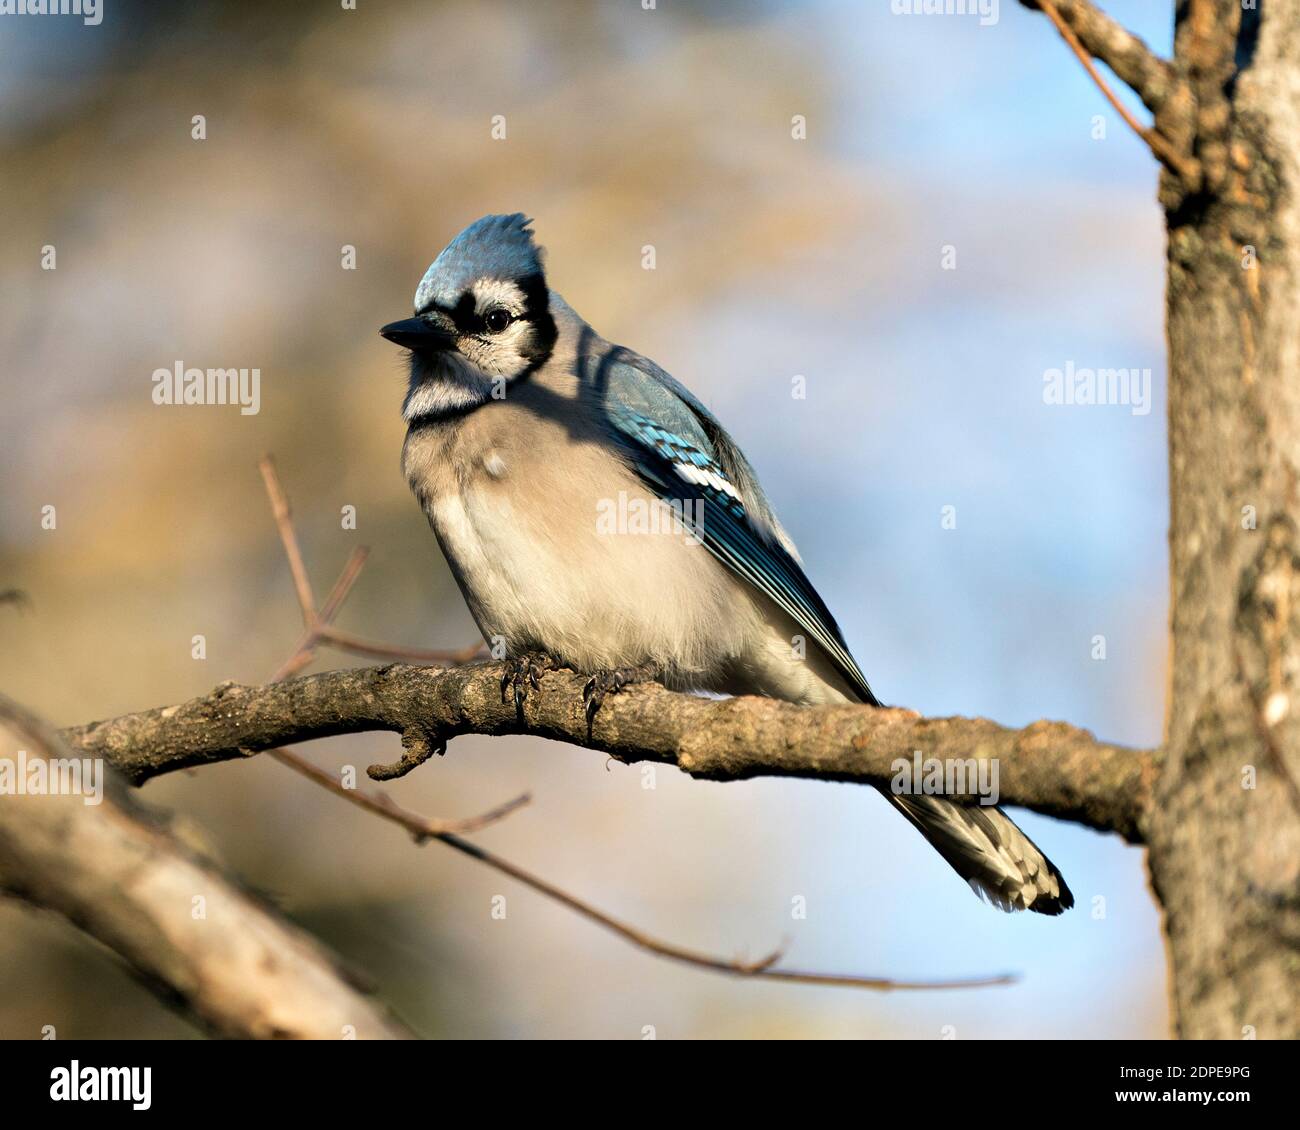 Blue Jay Stock Photo. Blue Jay close-up perched on a branch with a blur background in the forest environment and habitat displaying blue feather. Stock Photo